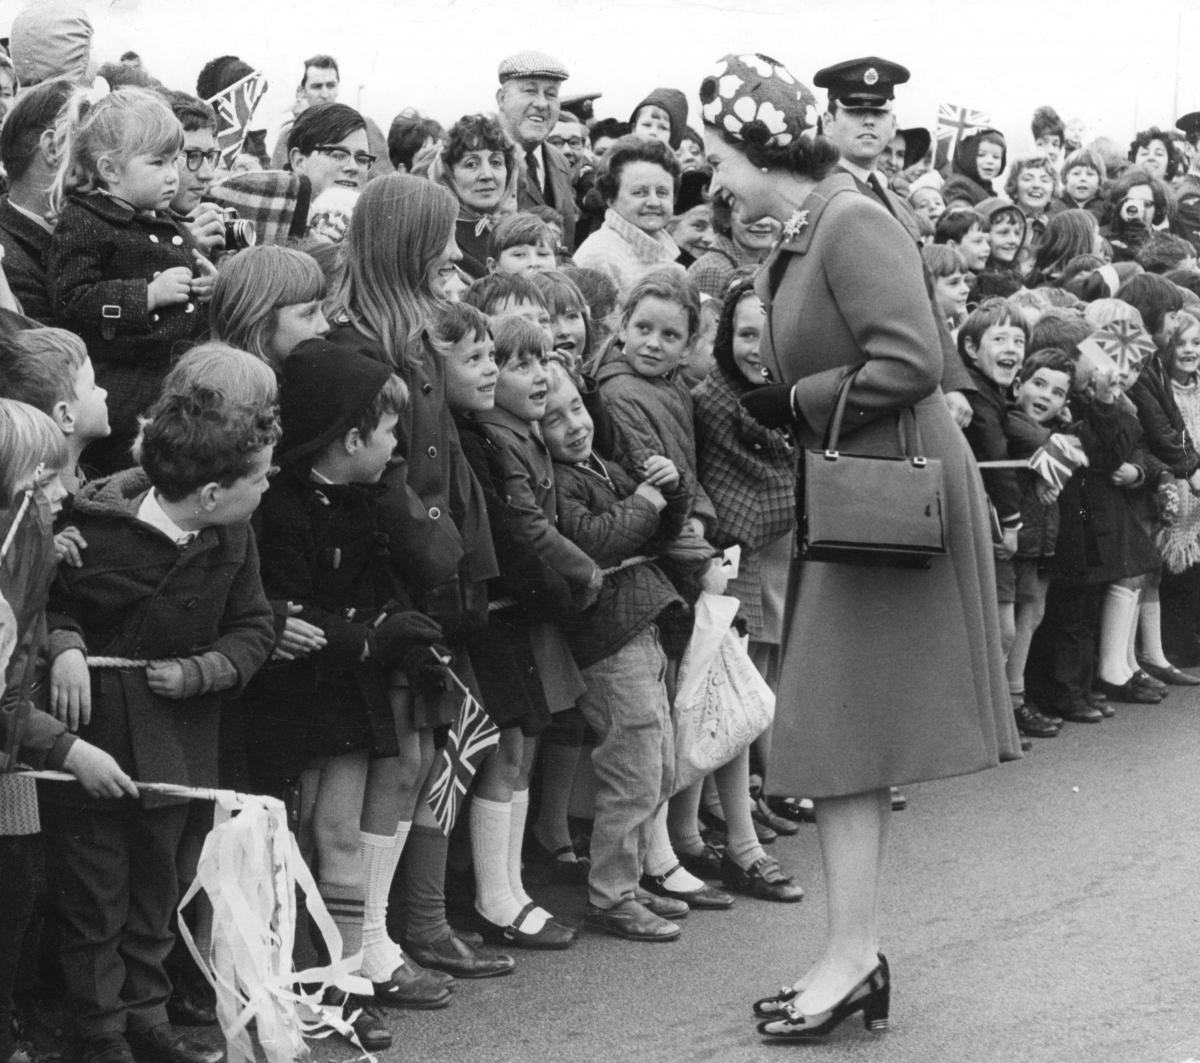 The Queen meets people in Oxford during a visit in 1971.